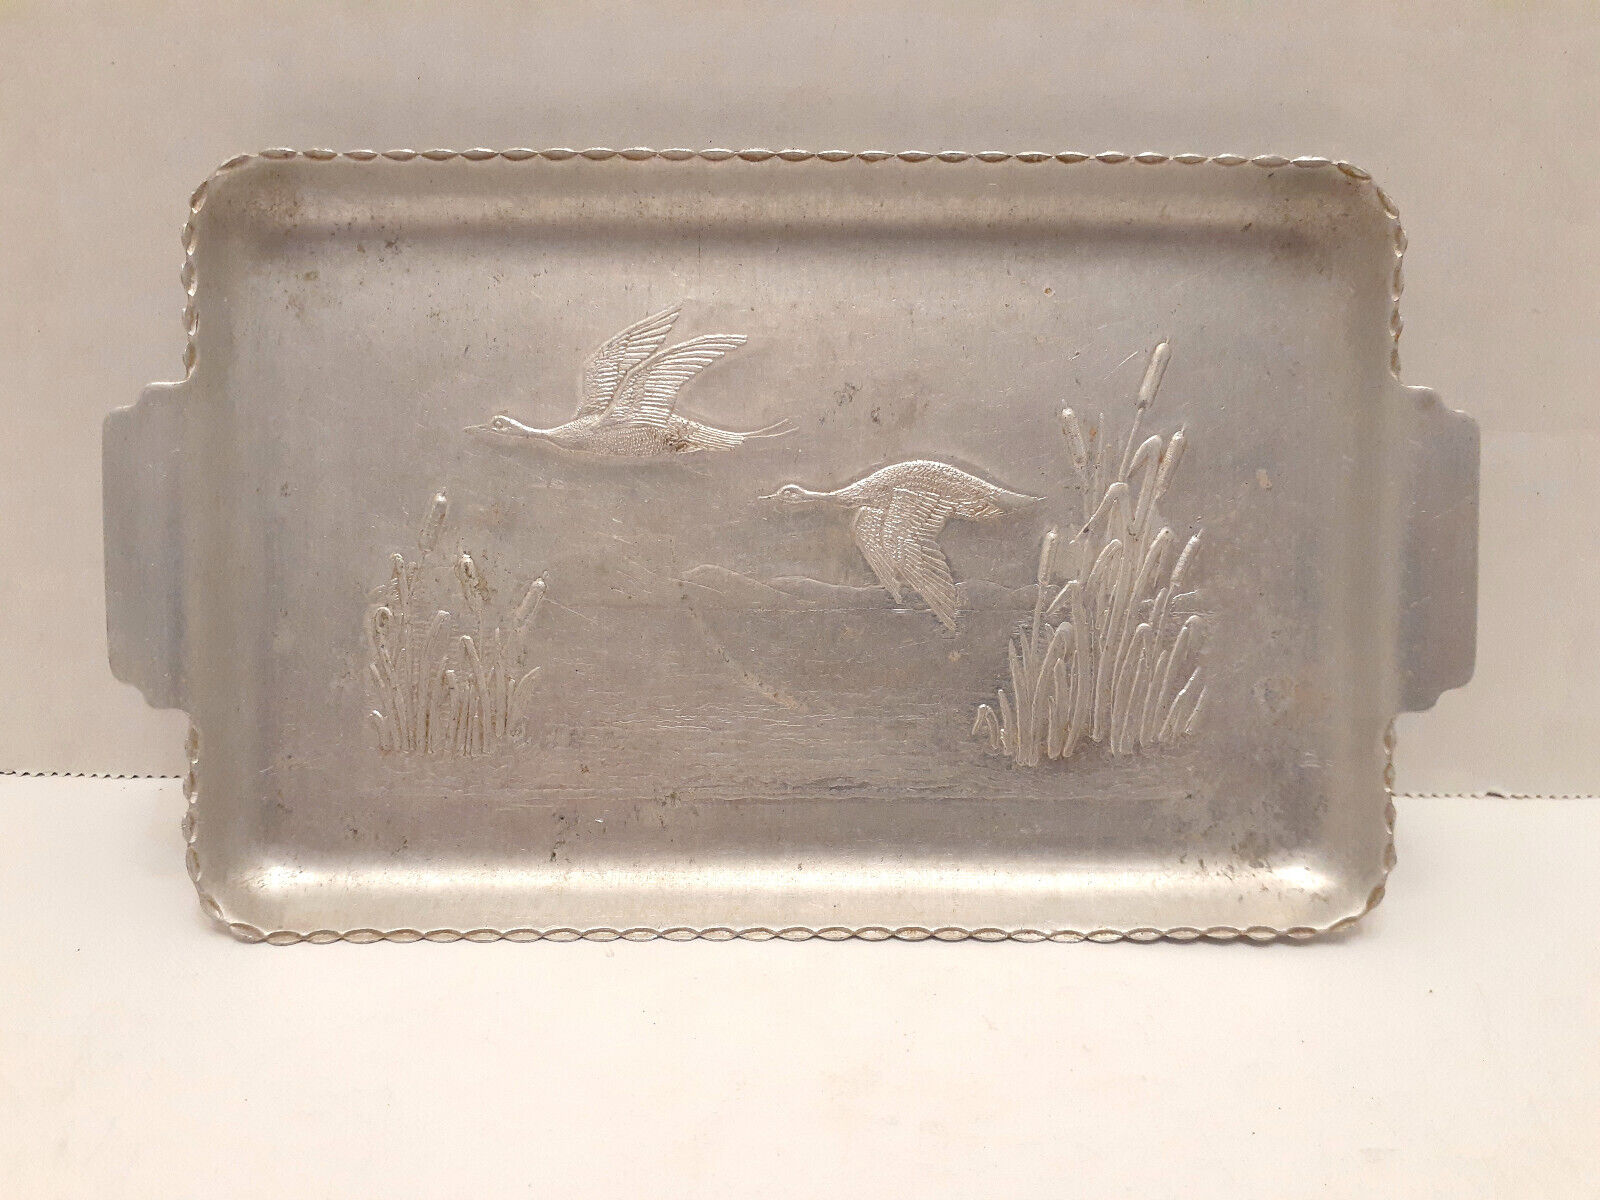 Vintage Embossed Aluminum Snack Tray Ducks Geese with Cat Tails Rectangular 